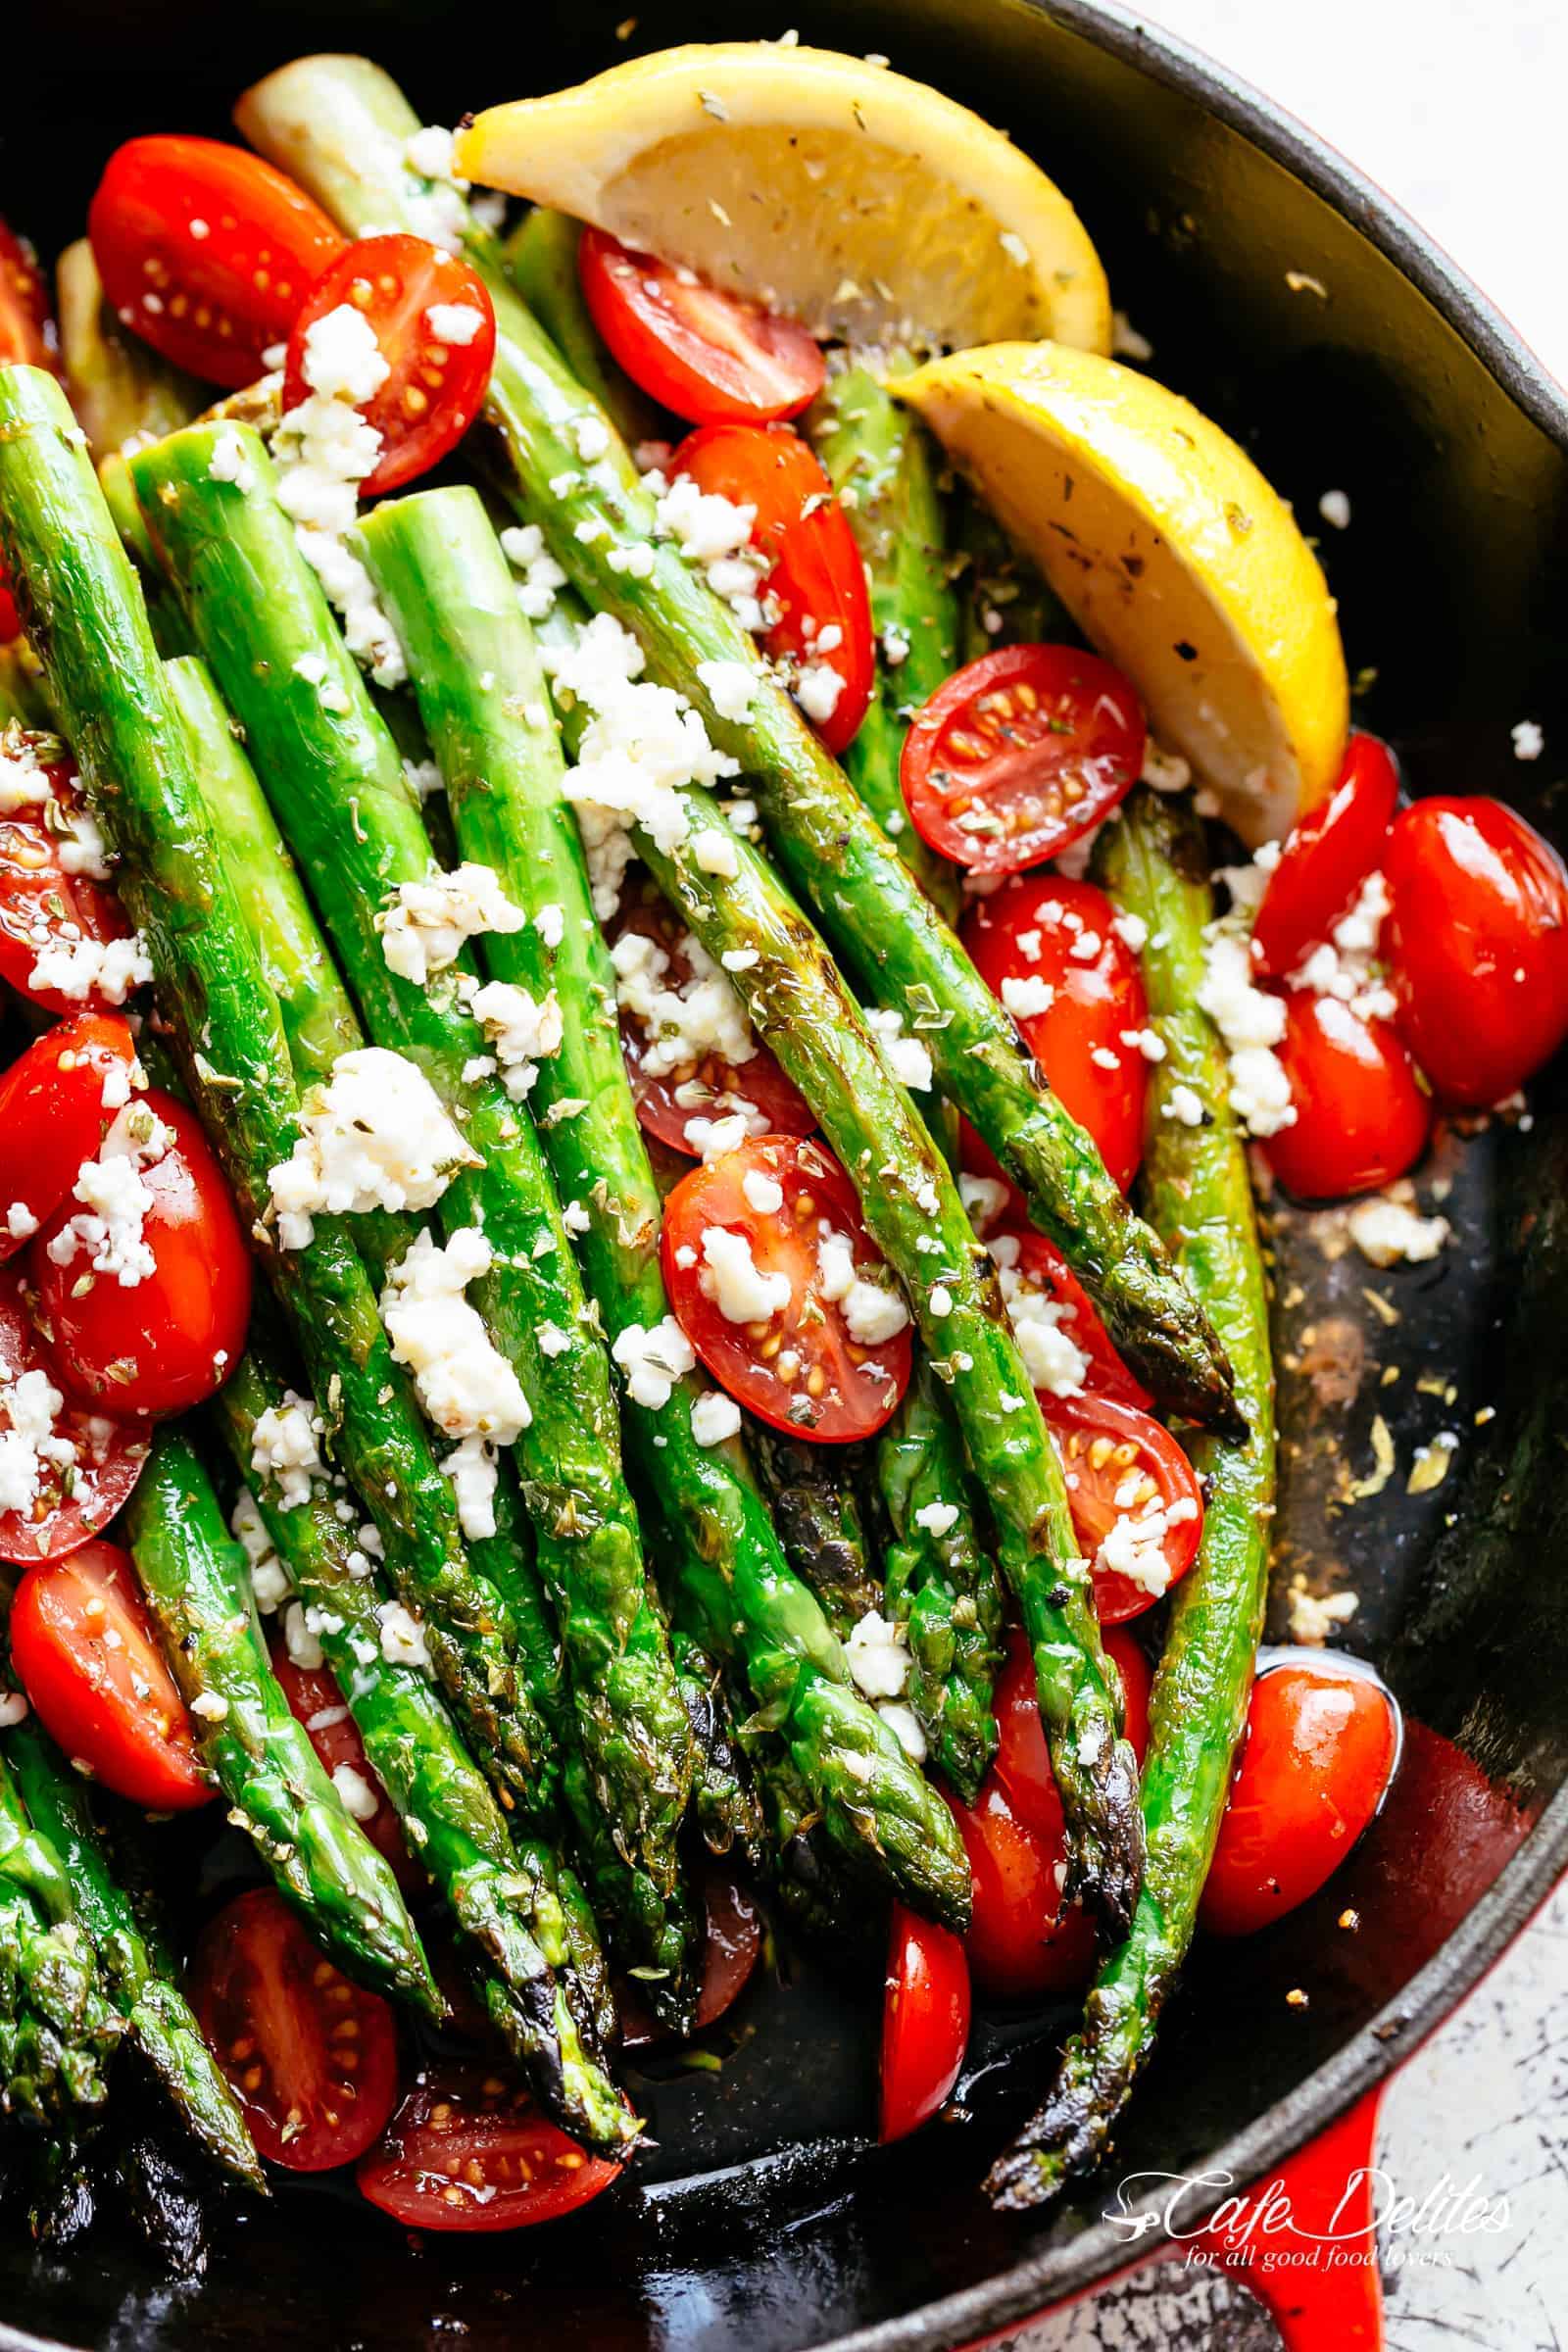 Lemon Garlic Asparagus topped feta cheese, tomatoes and drizzled with Mediterranean flavours makes the perfect side dish! Extremely addictive and takes less than 10 minutes to cook! Crispy on the outside, nice and tender on the inside and full of incredible lemon, garlic and herb flavours! | cafedelites.com